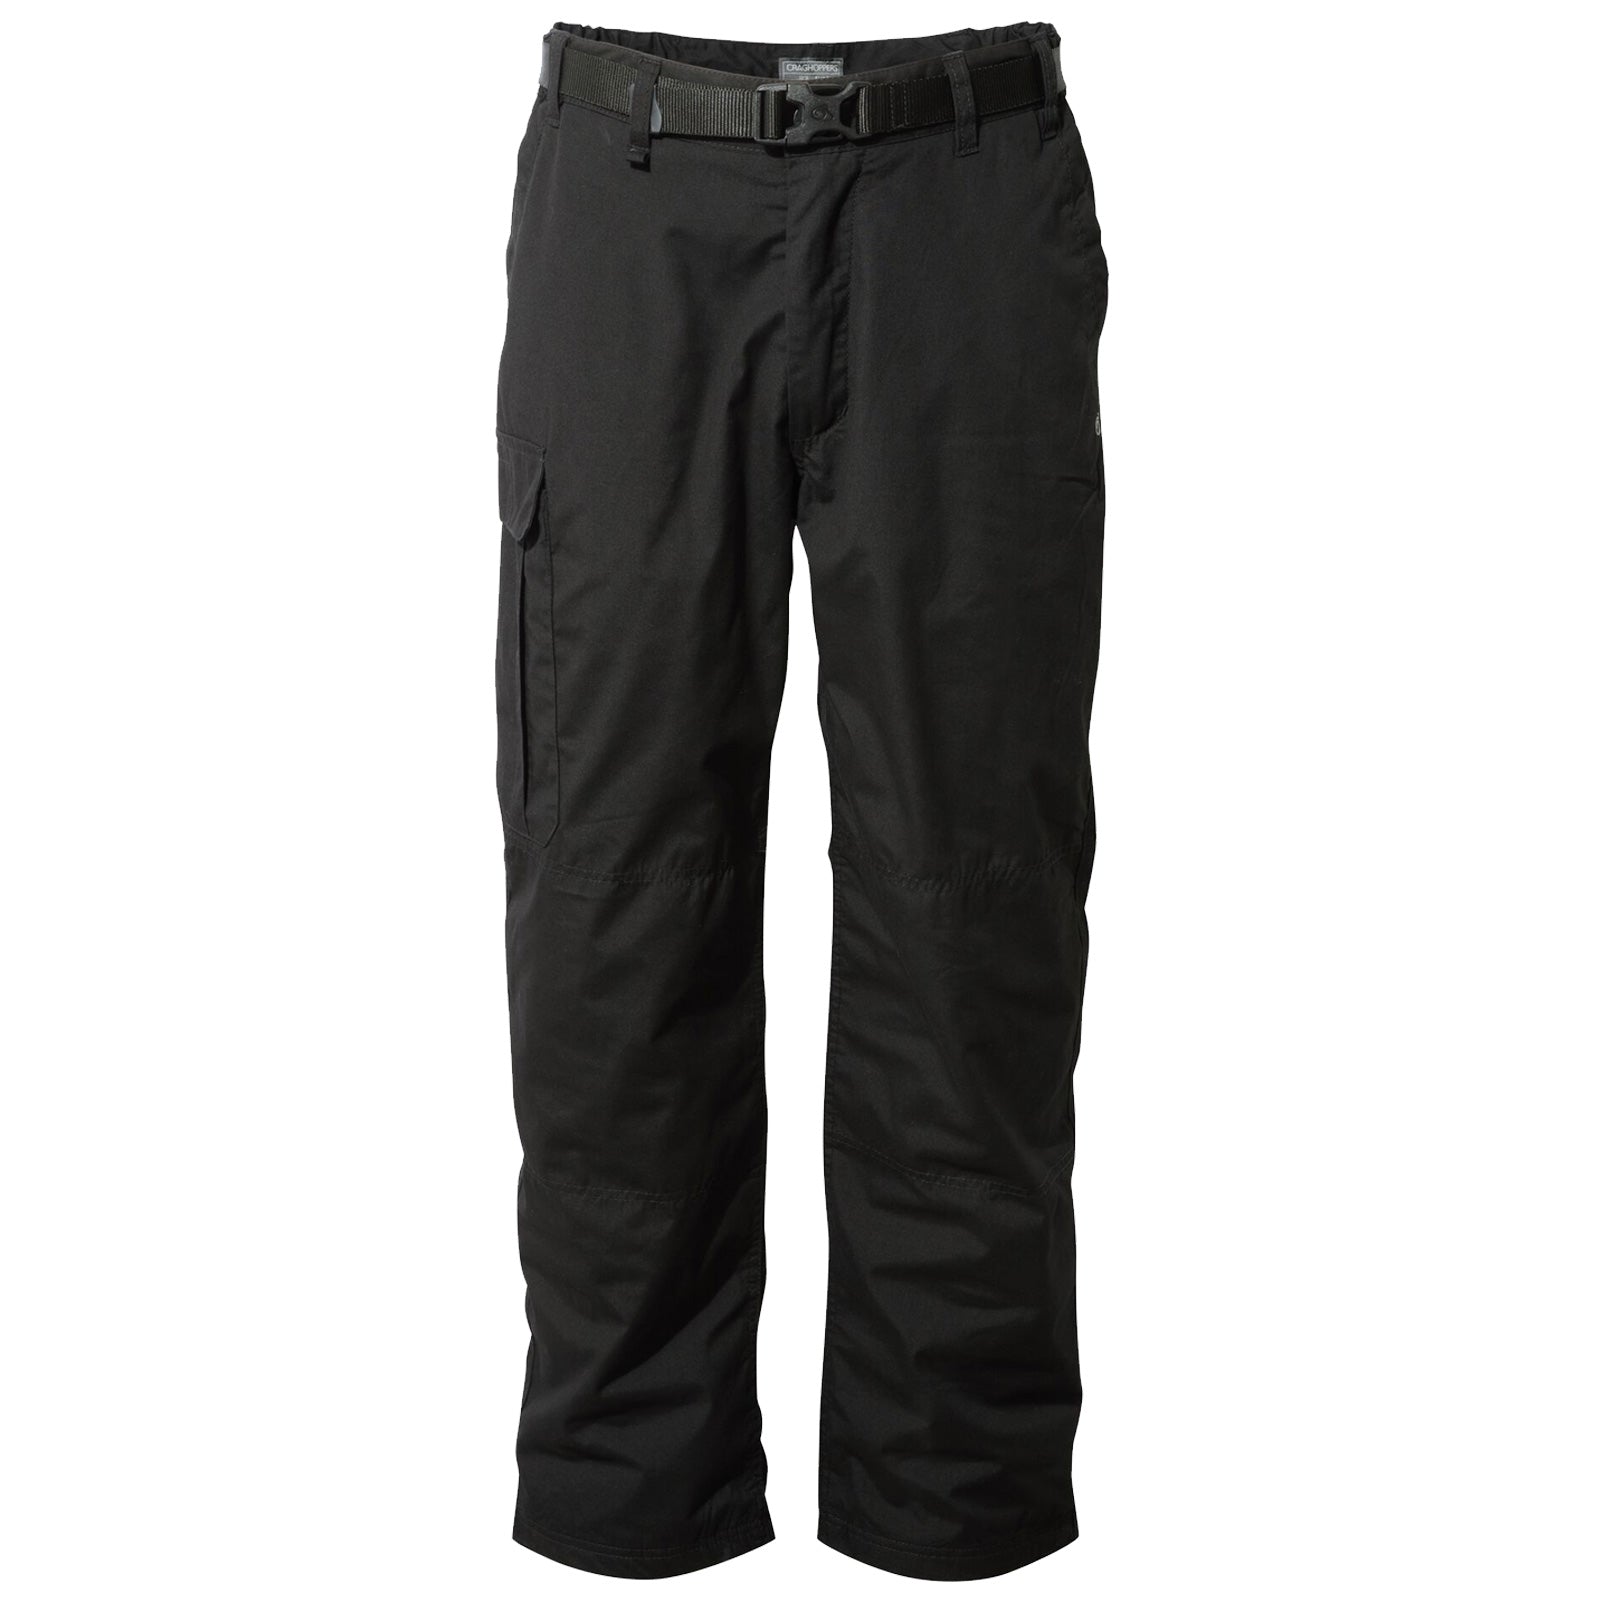 Craghoppers Kiwi Convertible Long Trousers, Black Pepper, Size 38 :  Amazon.in: Clothing & Accessories